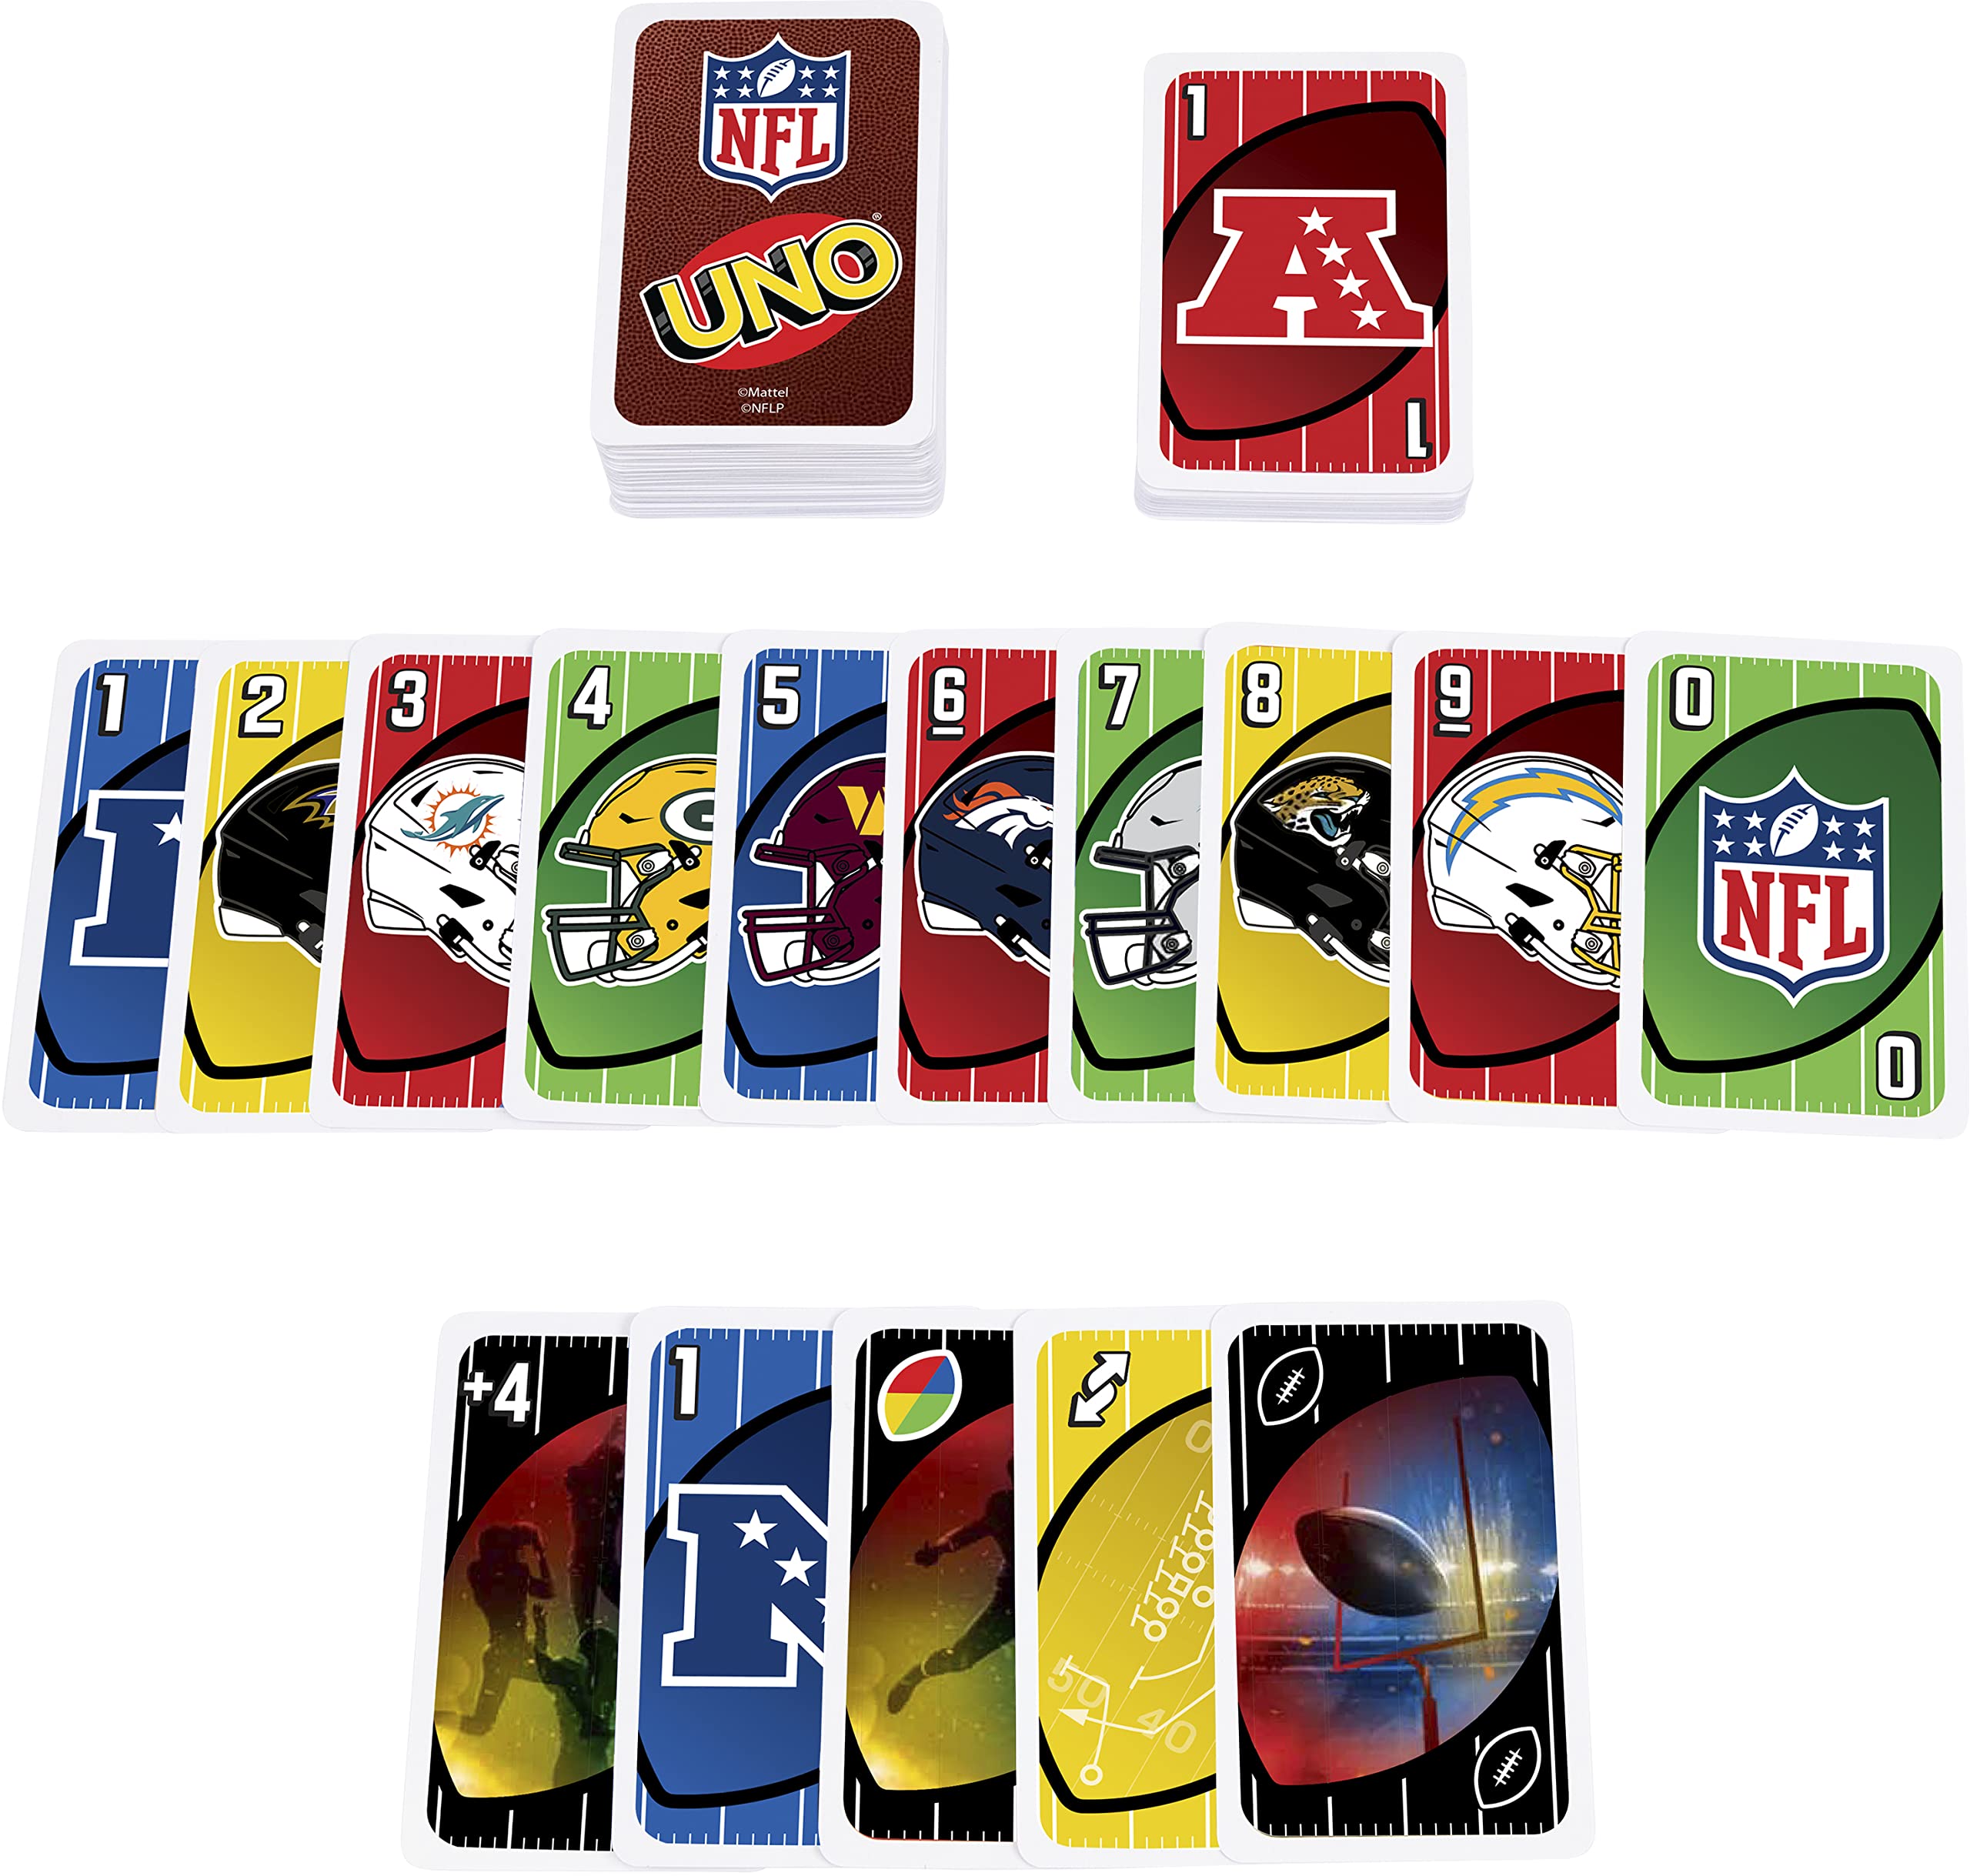 Mattel Games UNO NFL Card Game for Kids & Adults, Travel Game with NFL Team Logos & Special Rule in Storage Tin Box